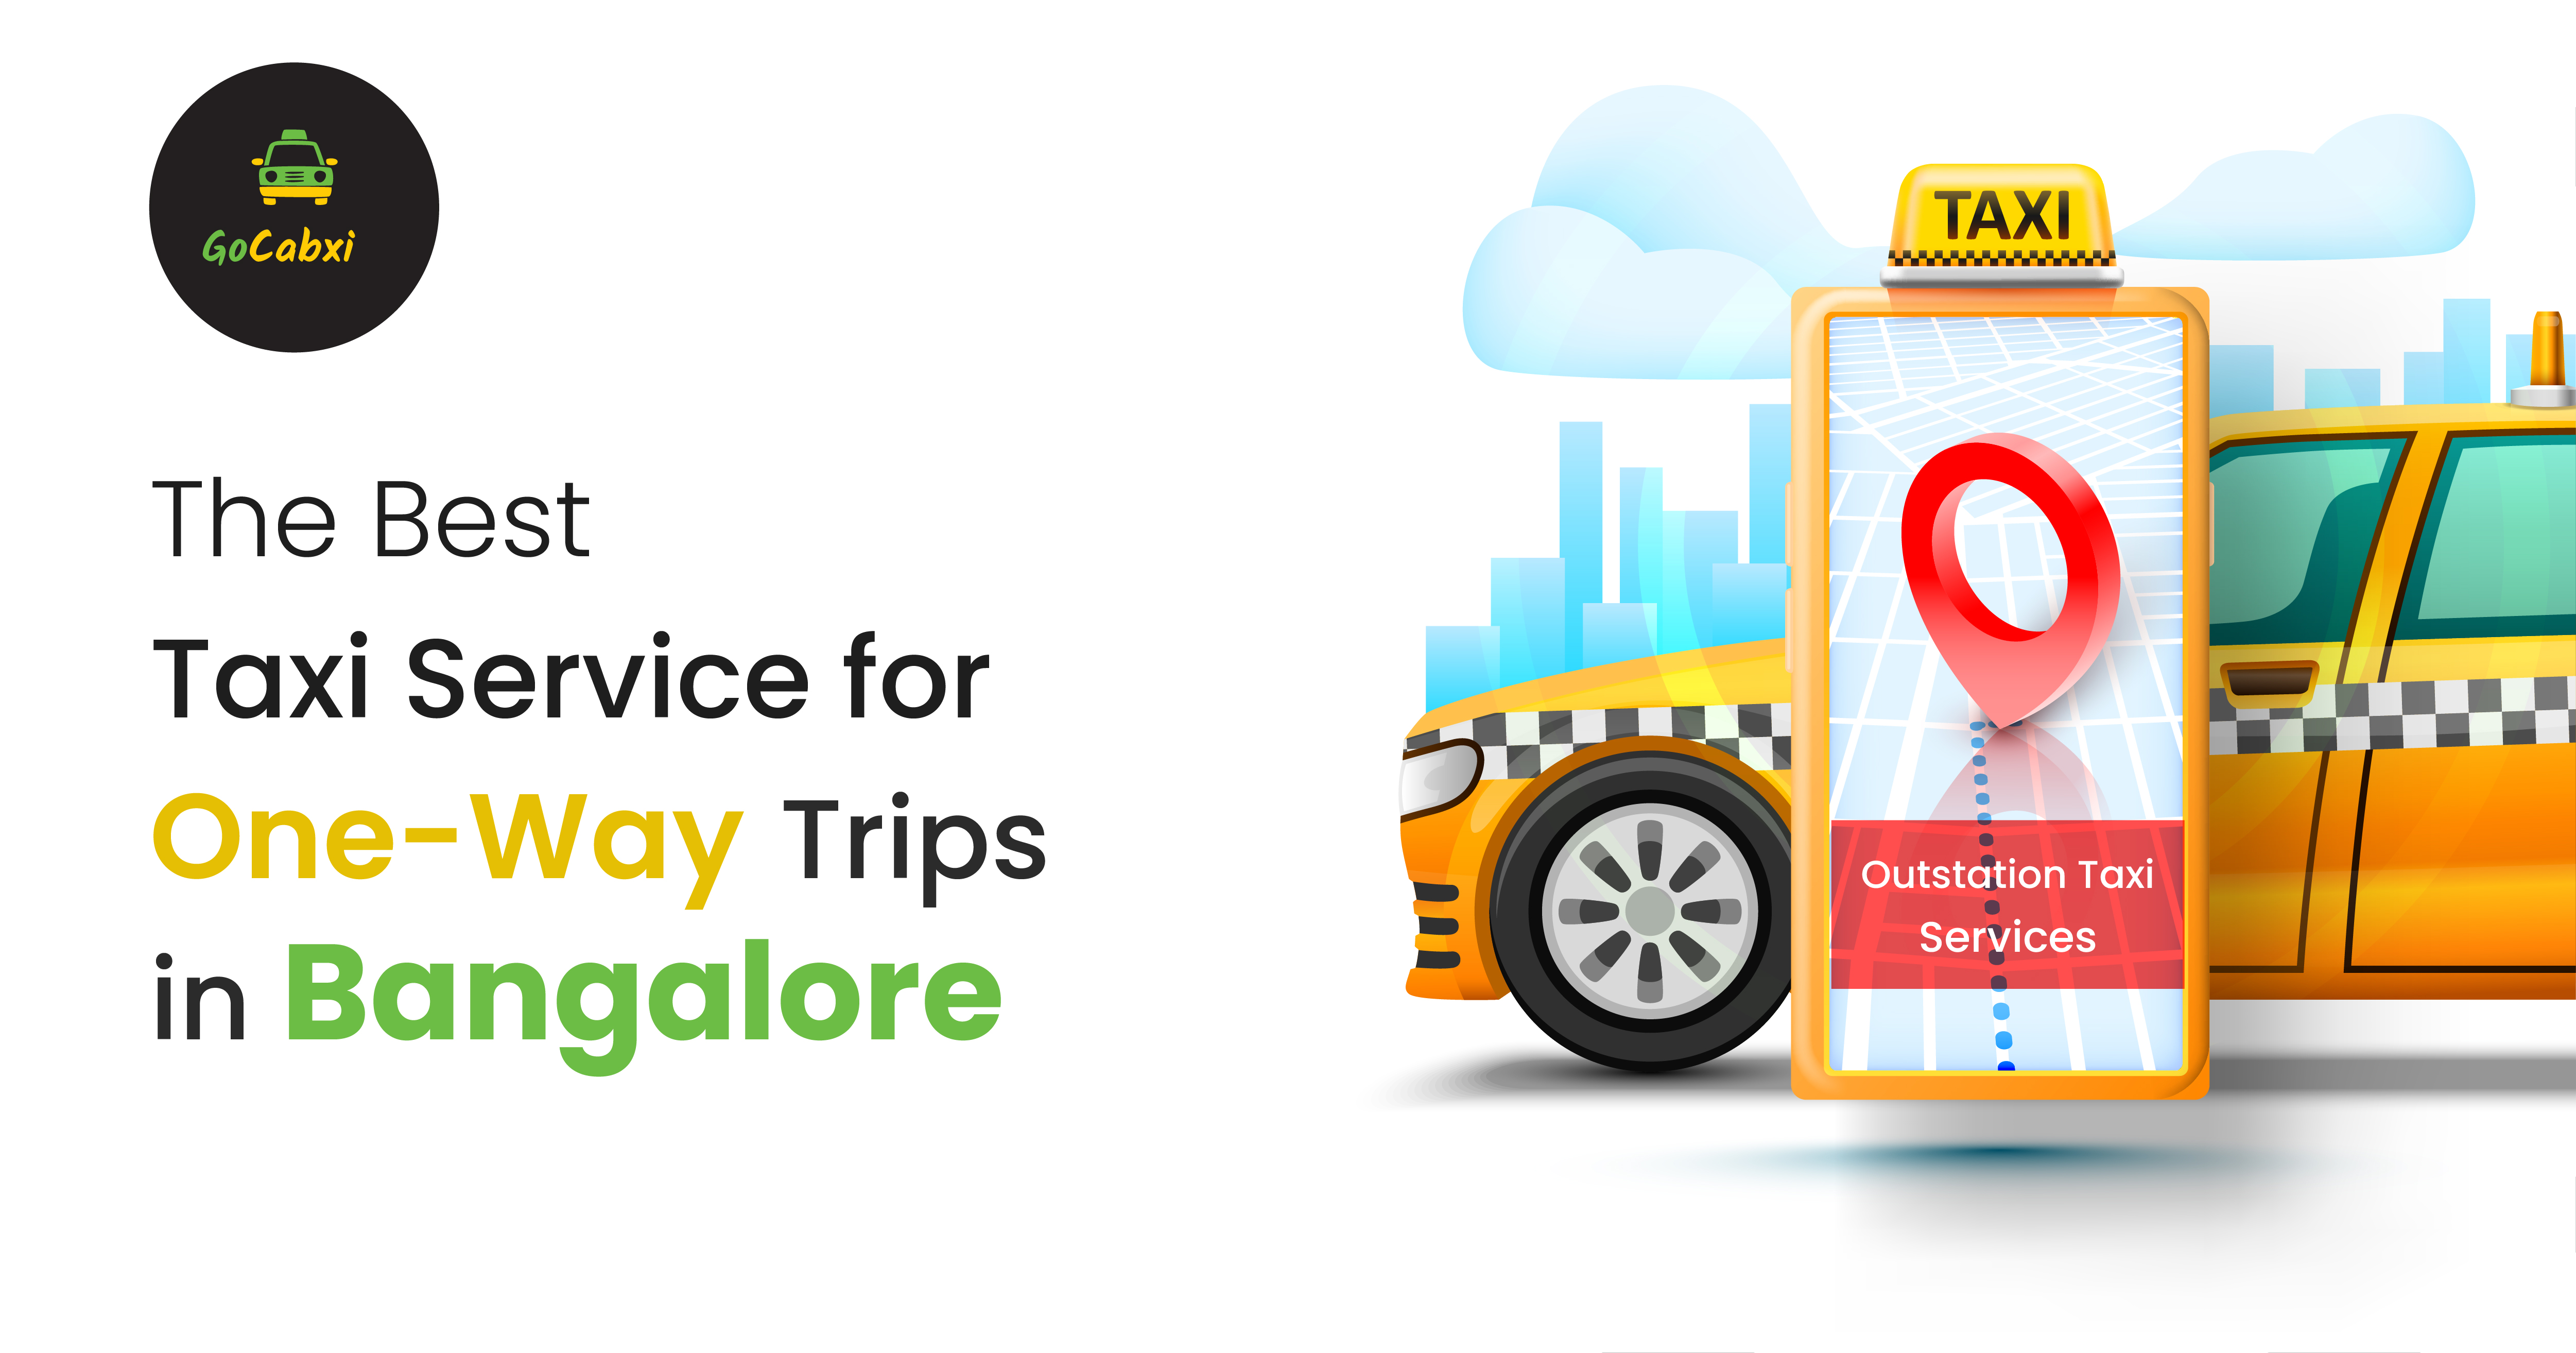 The Best Taxi Service for One-Way Trips in Bangalore